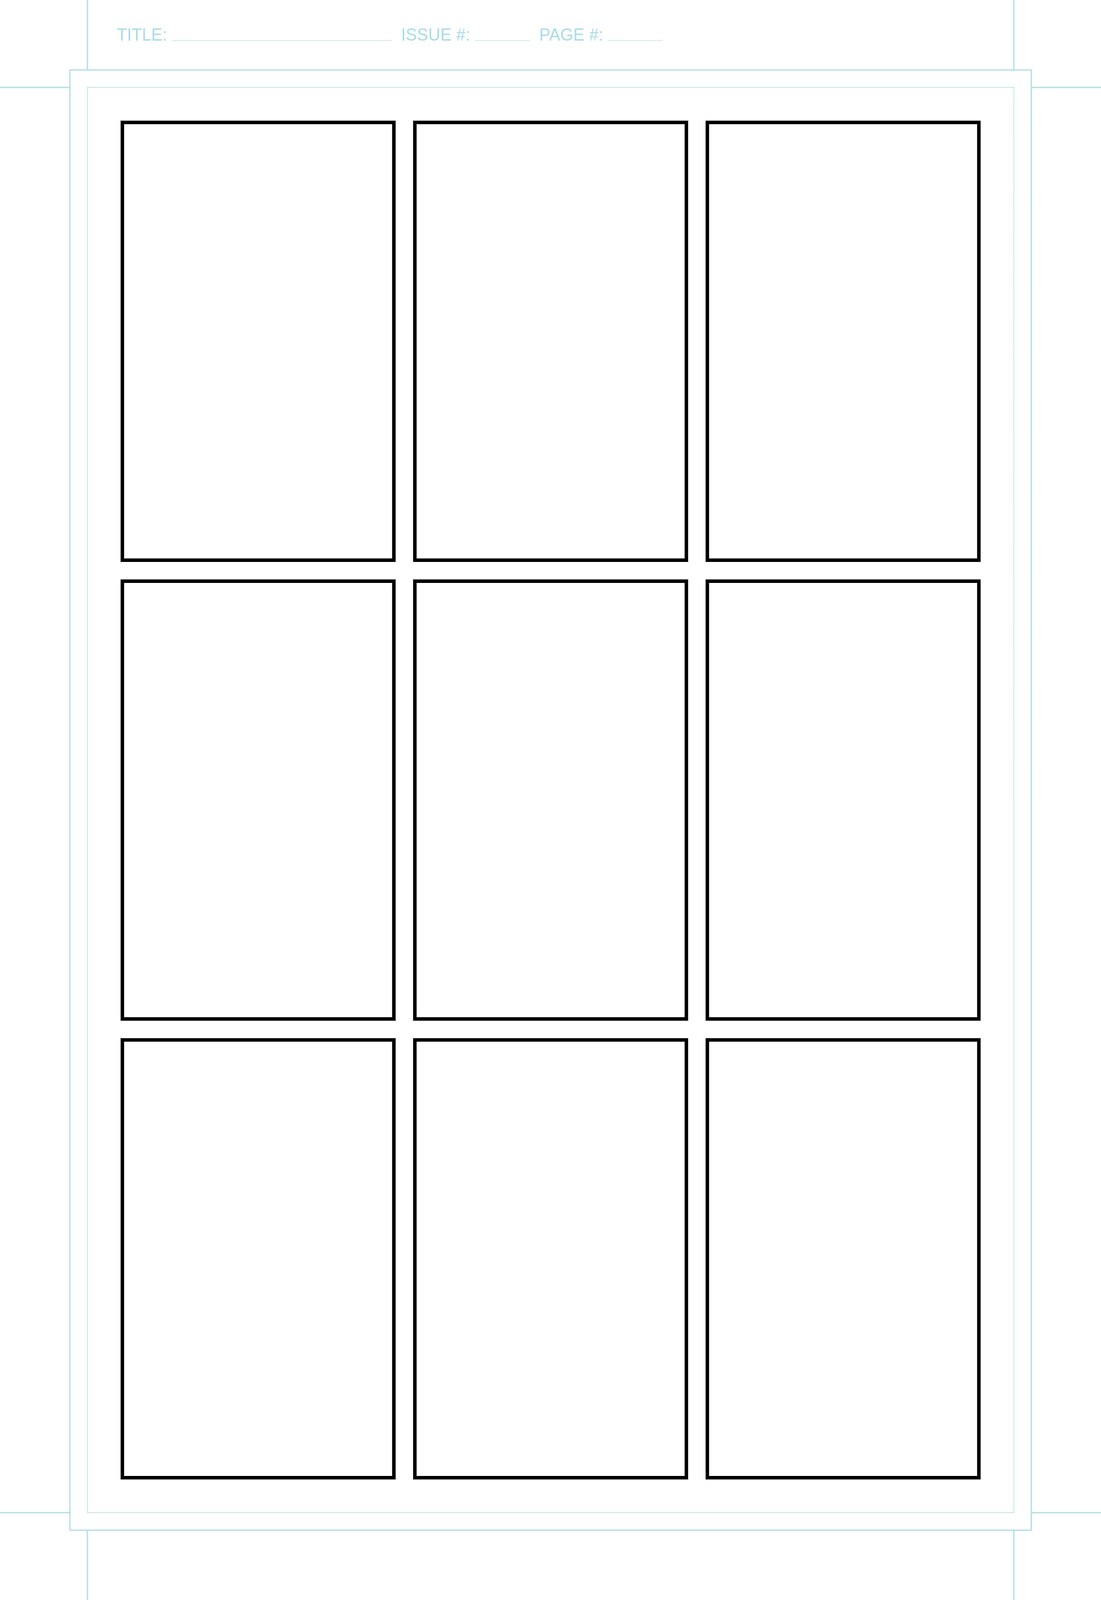 american comic single page template with 3x3 panel grid